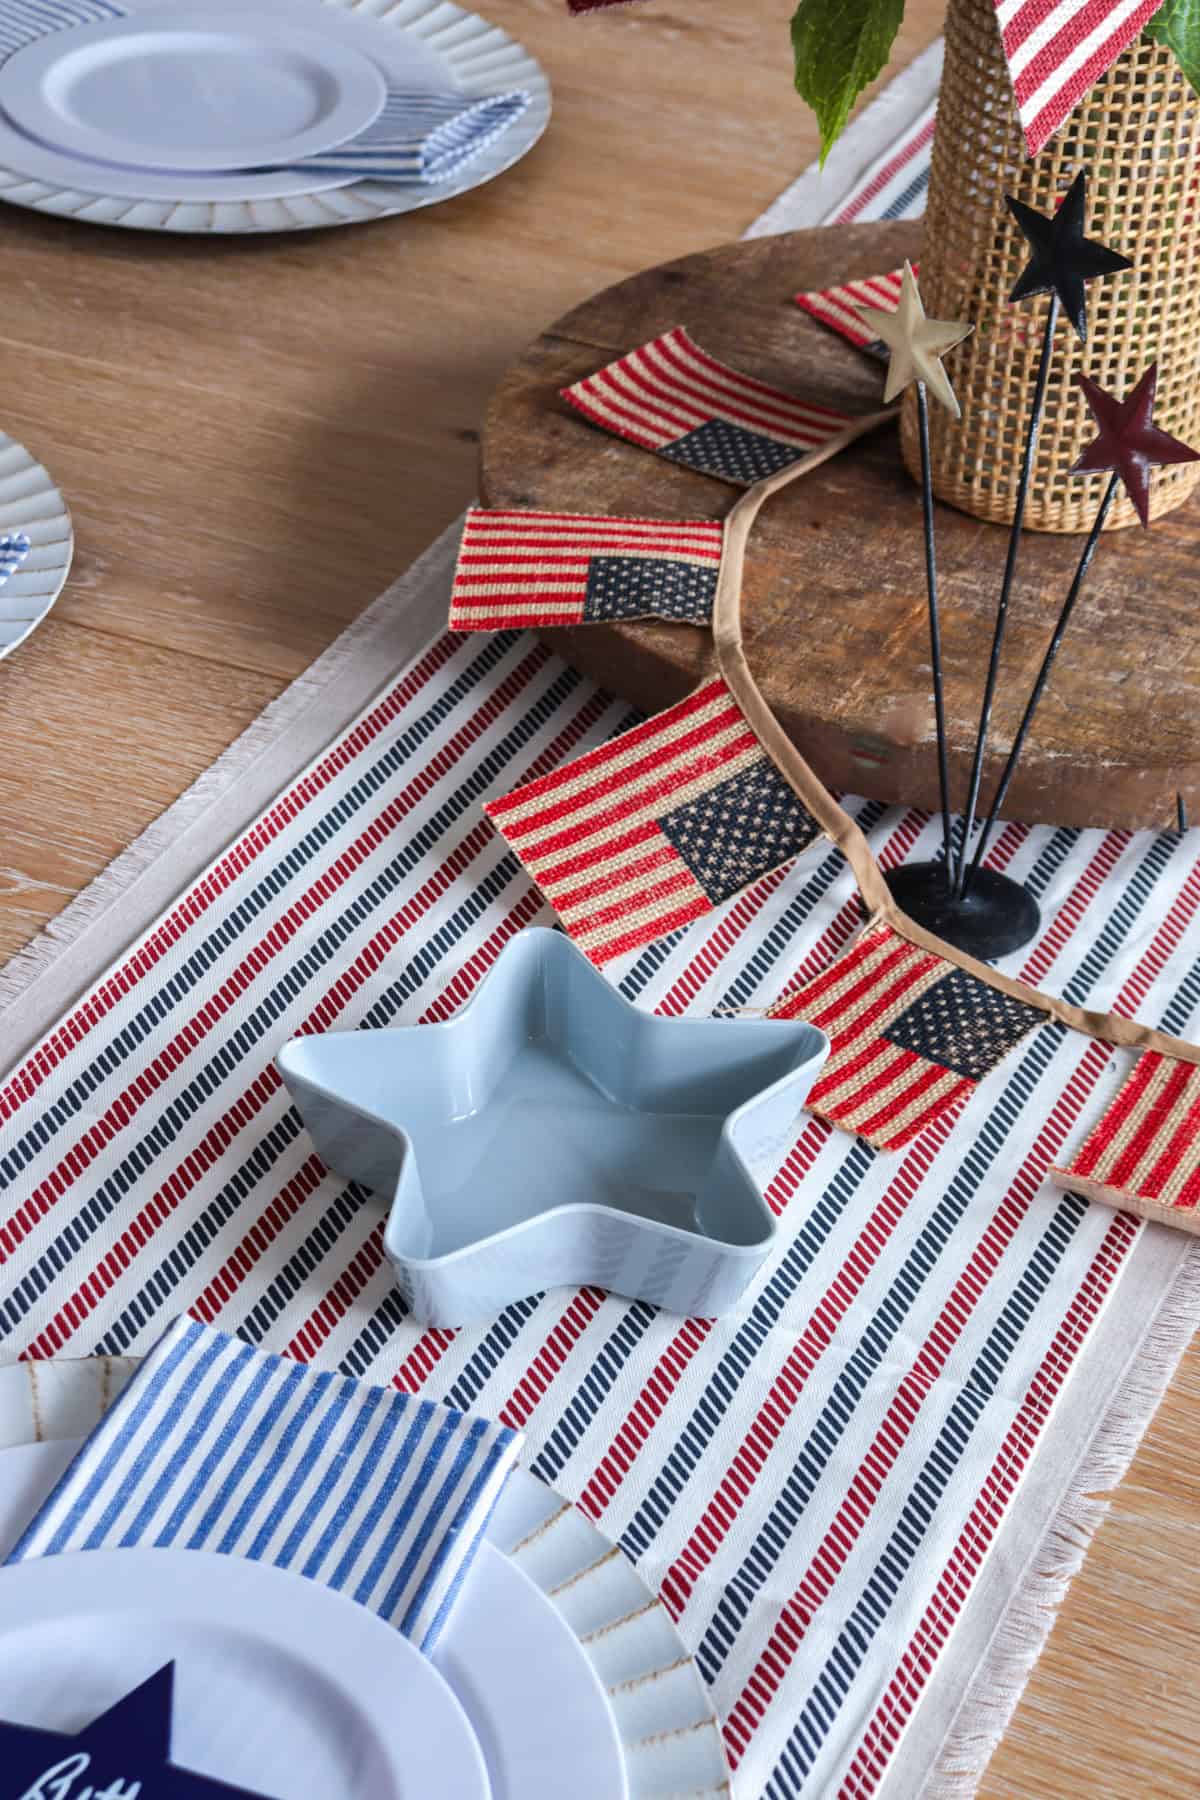 Red white and blue table decor for July 4th party.